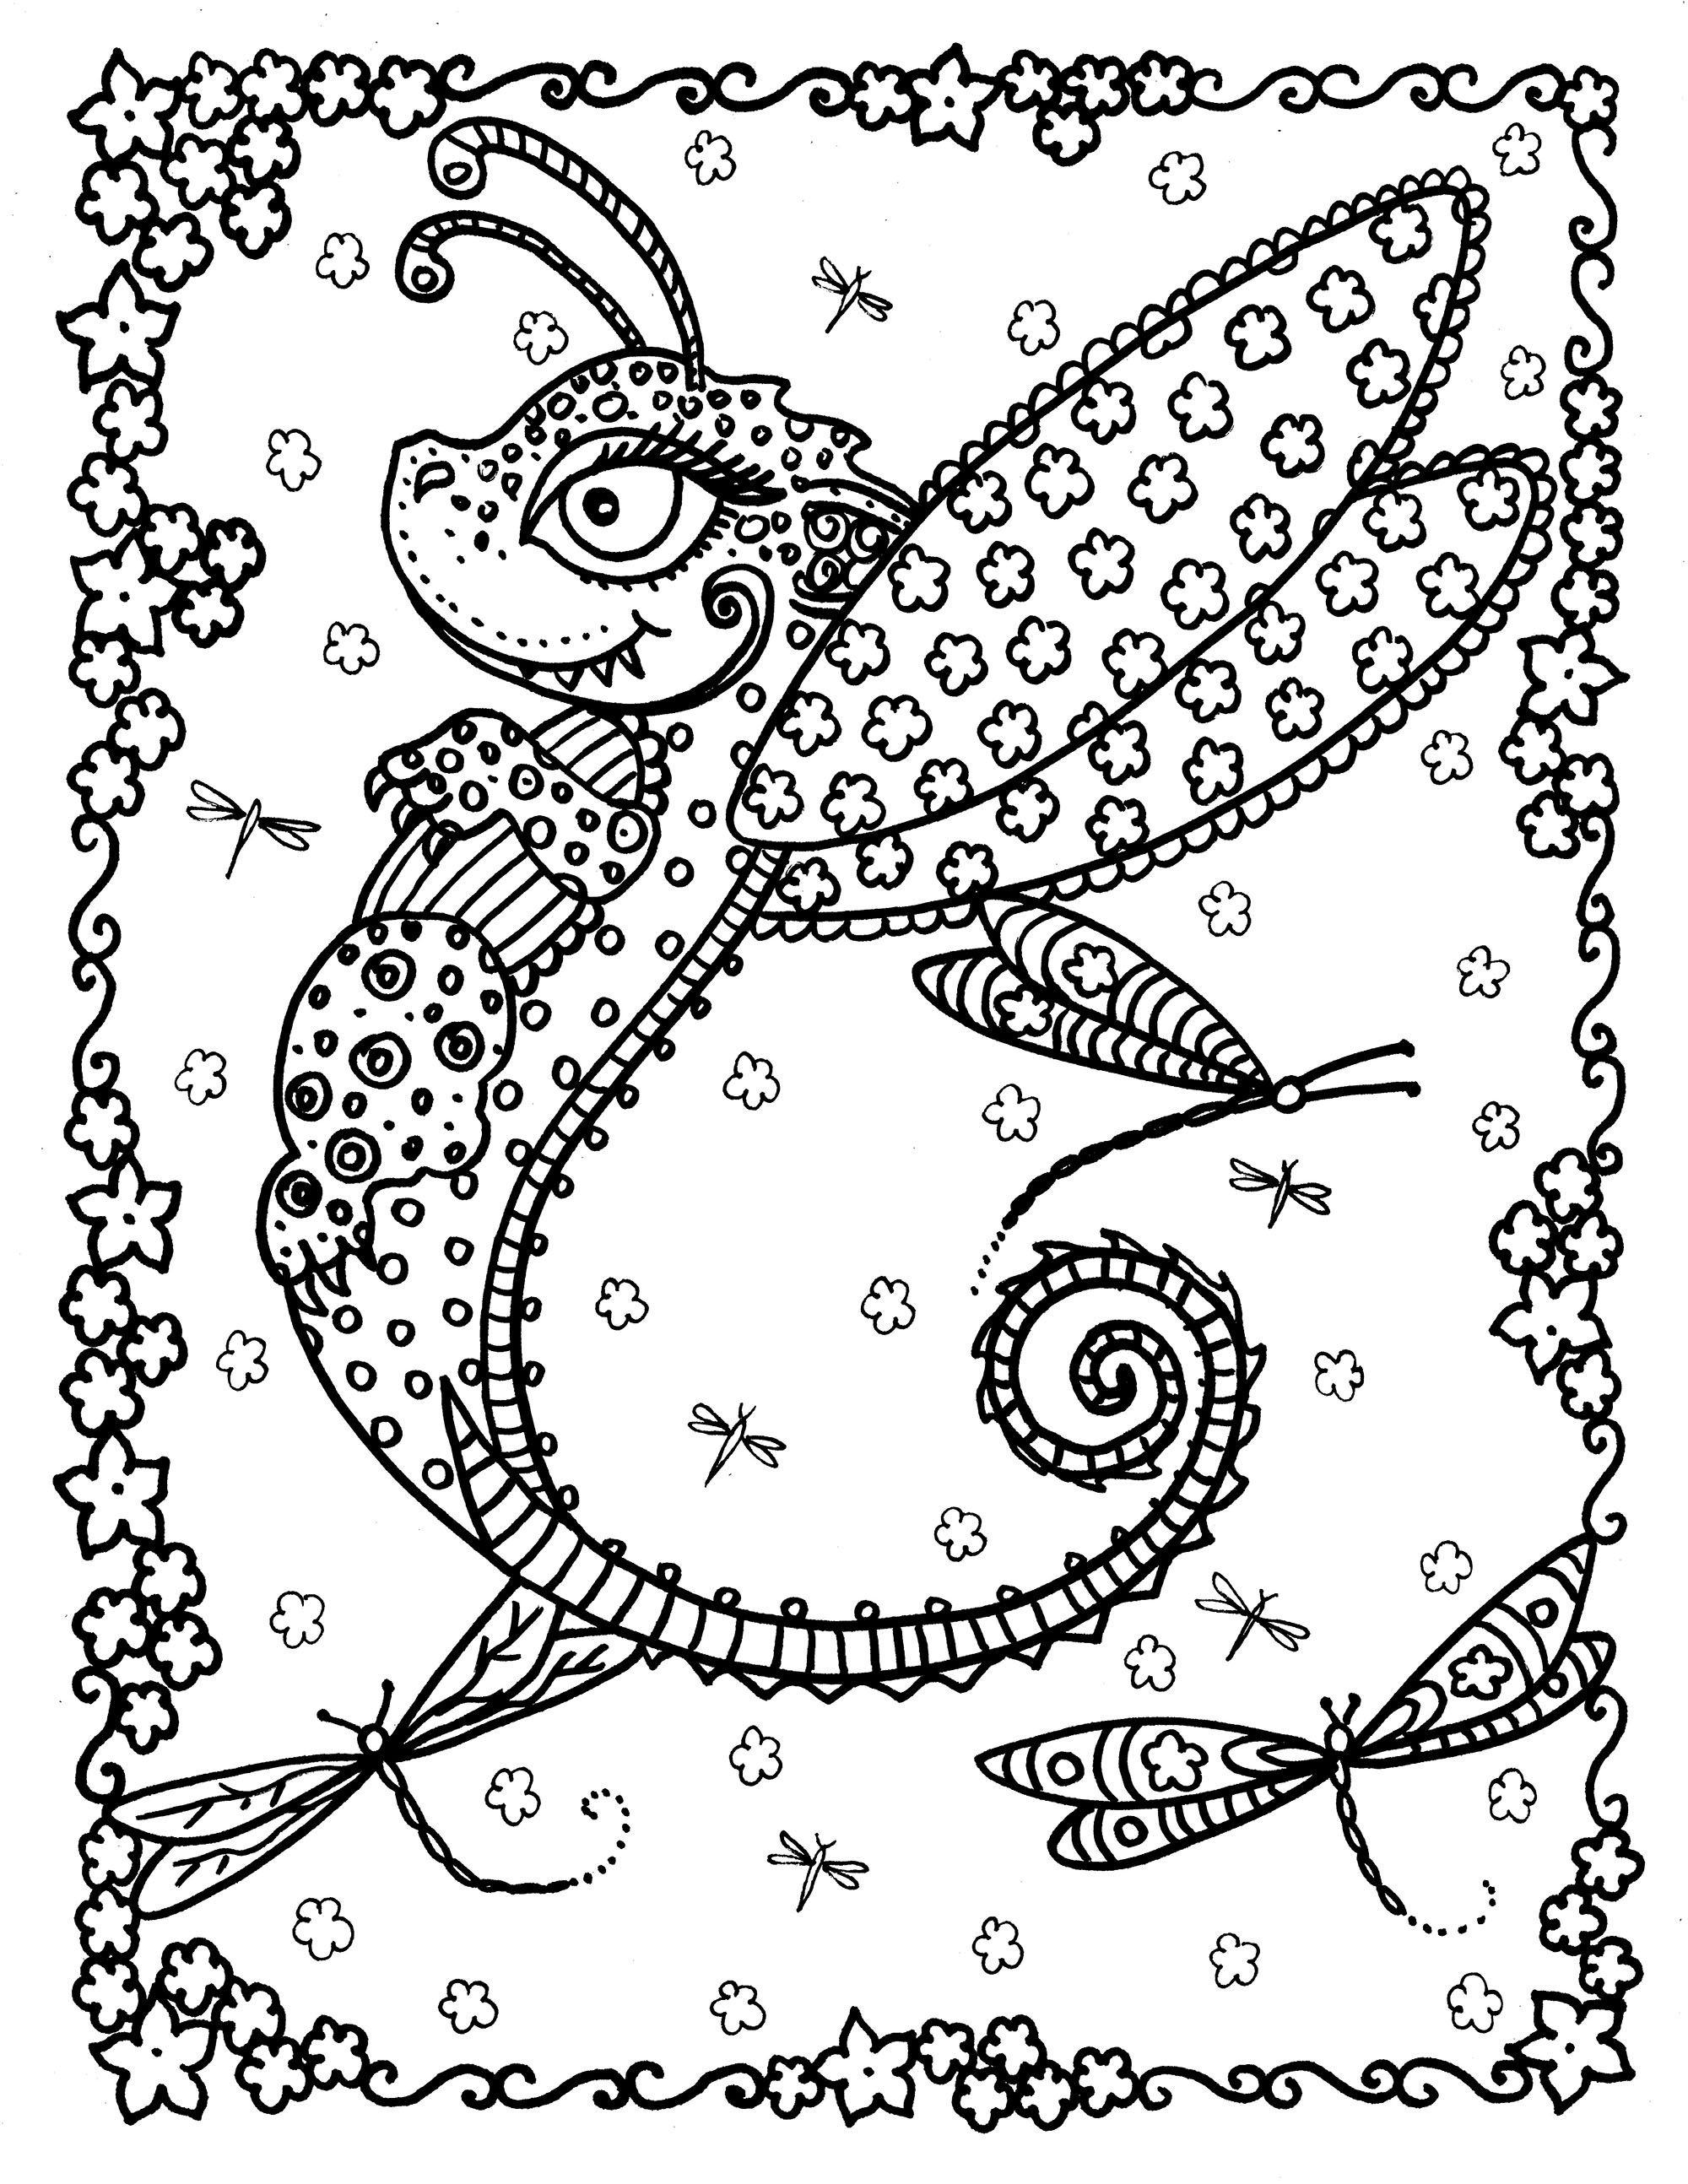 Butterfly dragon - Anti stress Adult Coloring Pages